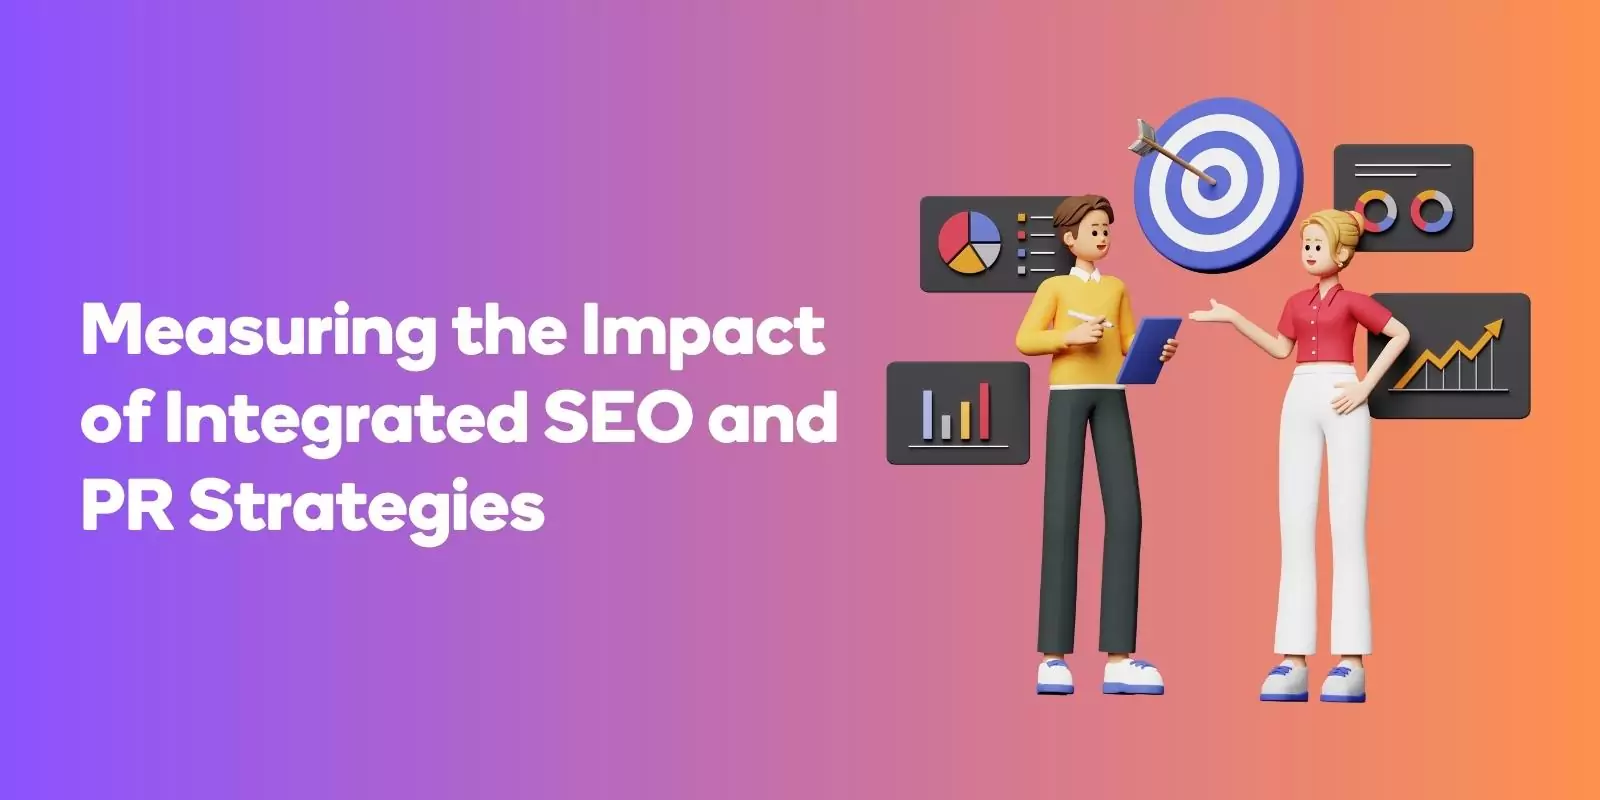 Measuring the Impact of Integrated SEO and PR Strategies